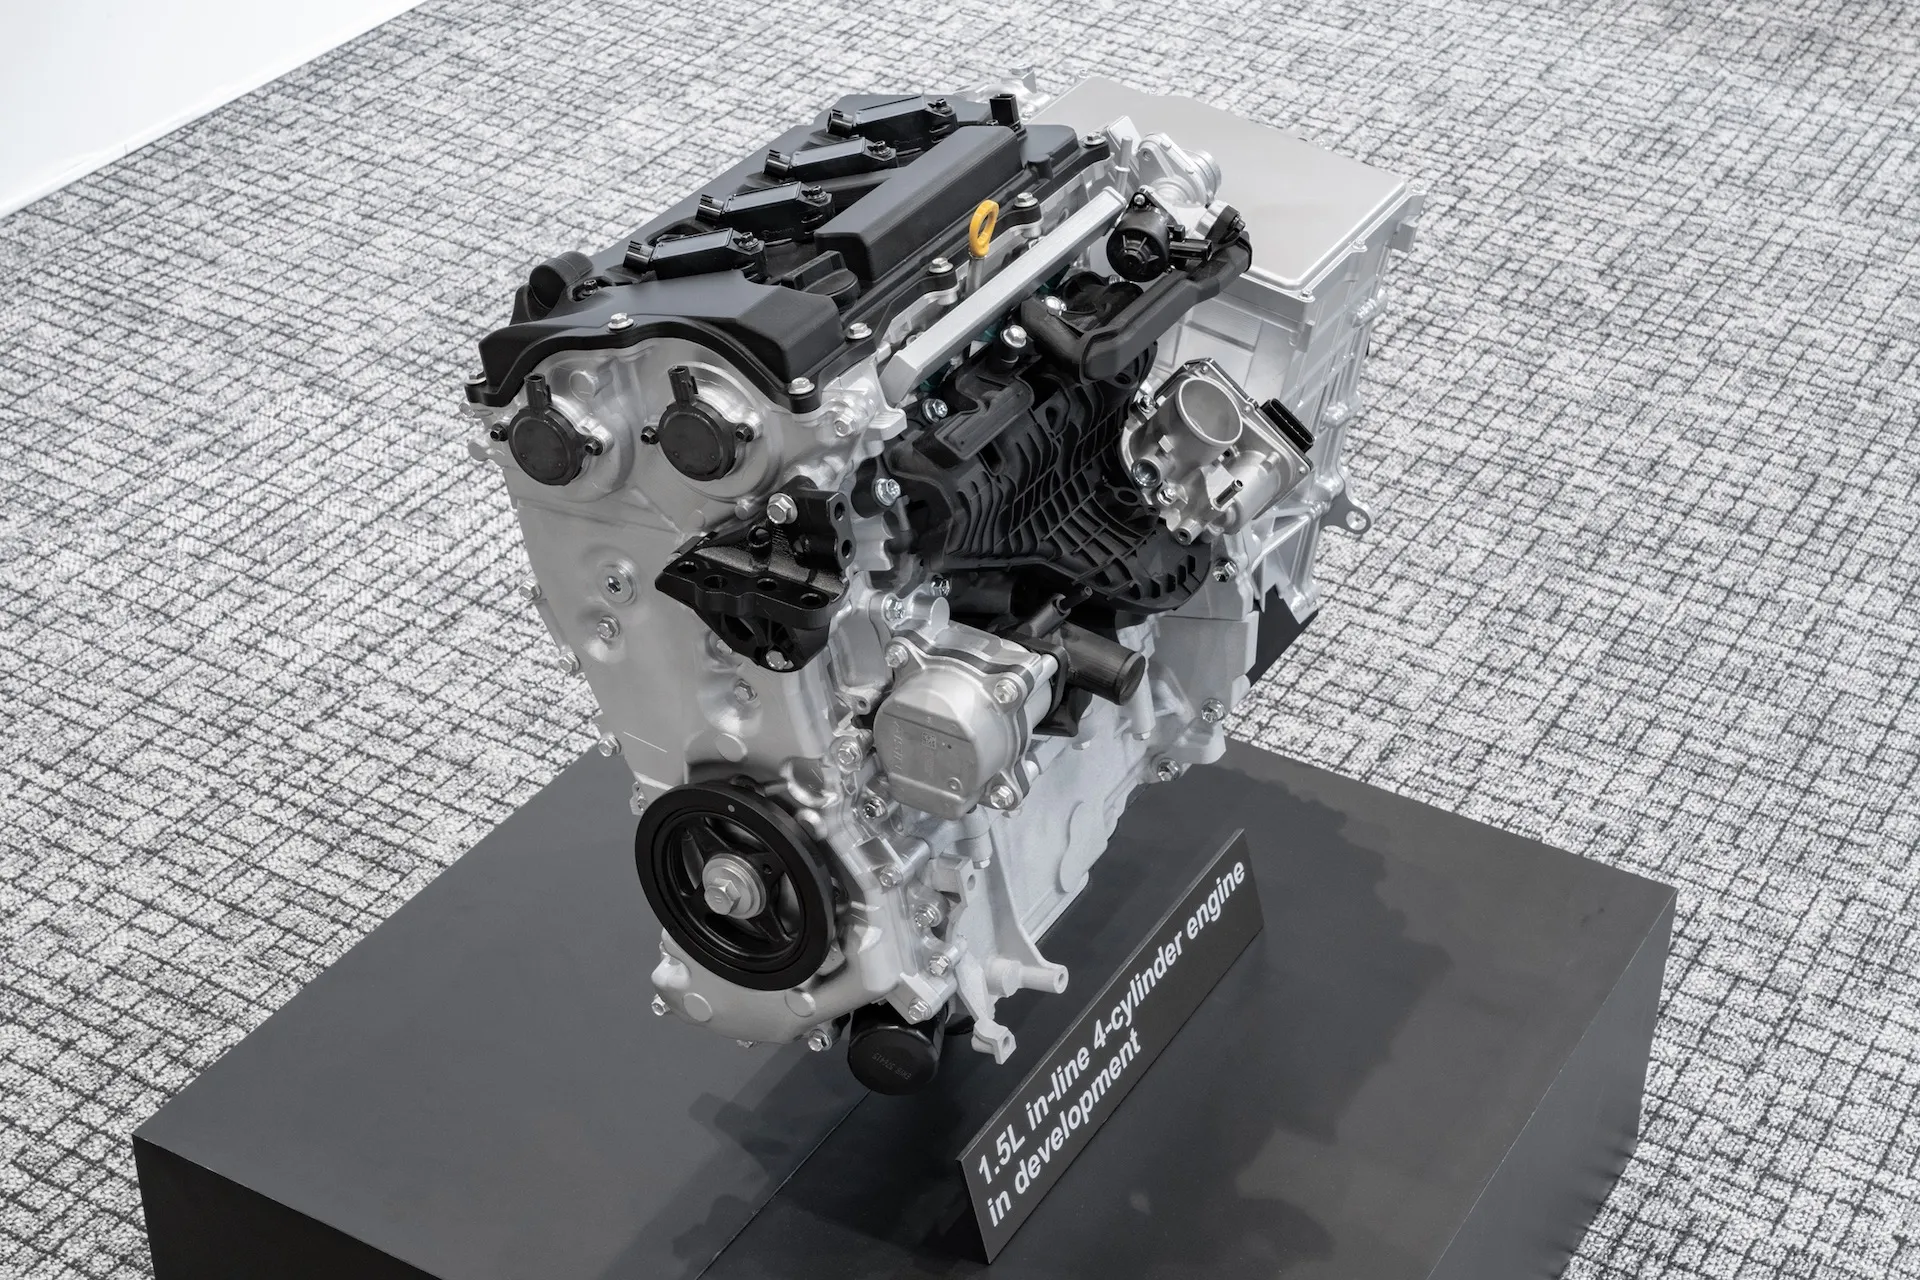 Flat 4 rotor hybrid? No, but Toyota, Subaru and Mazda will develop new engines together